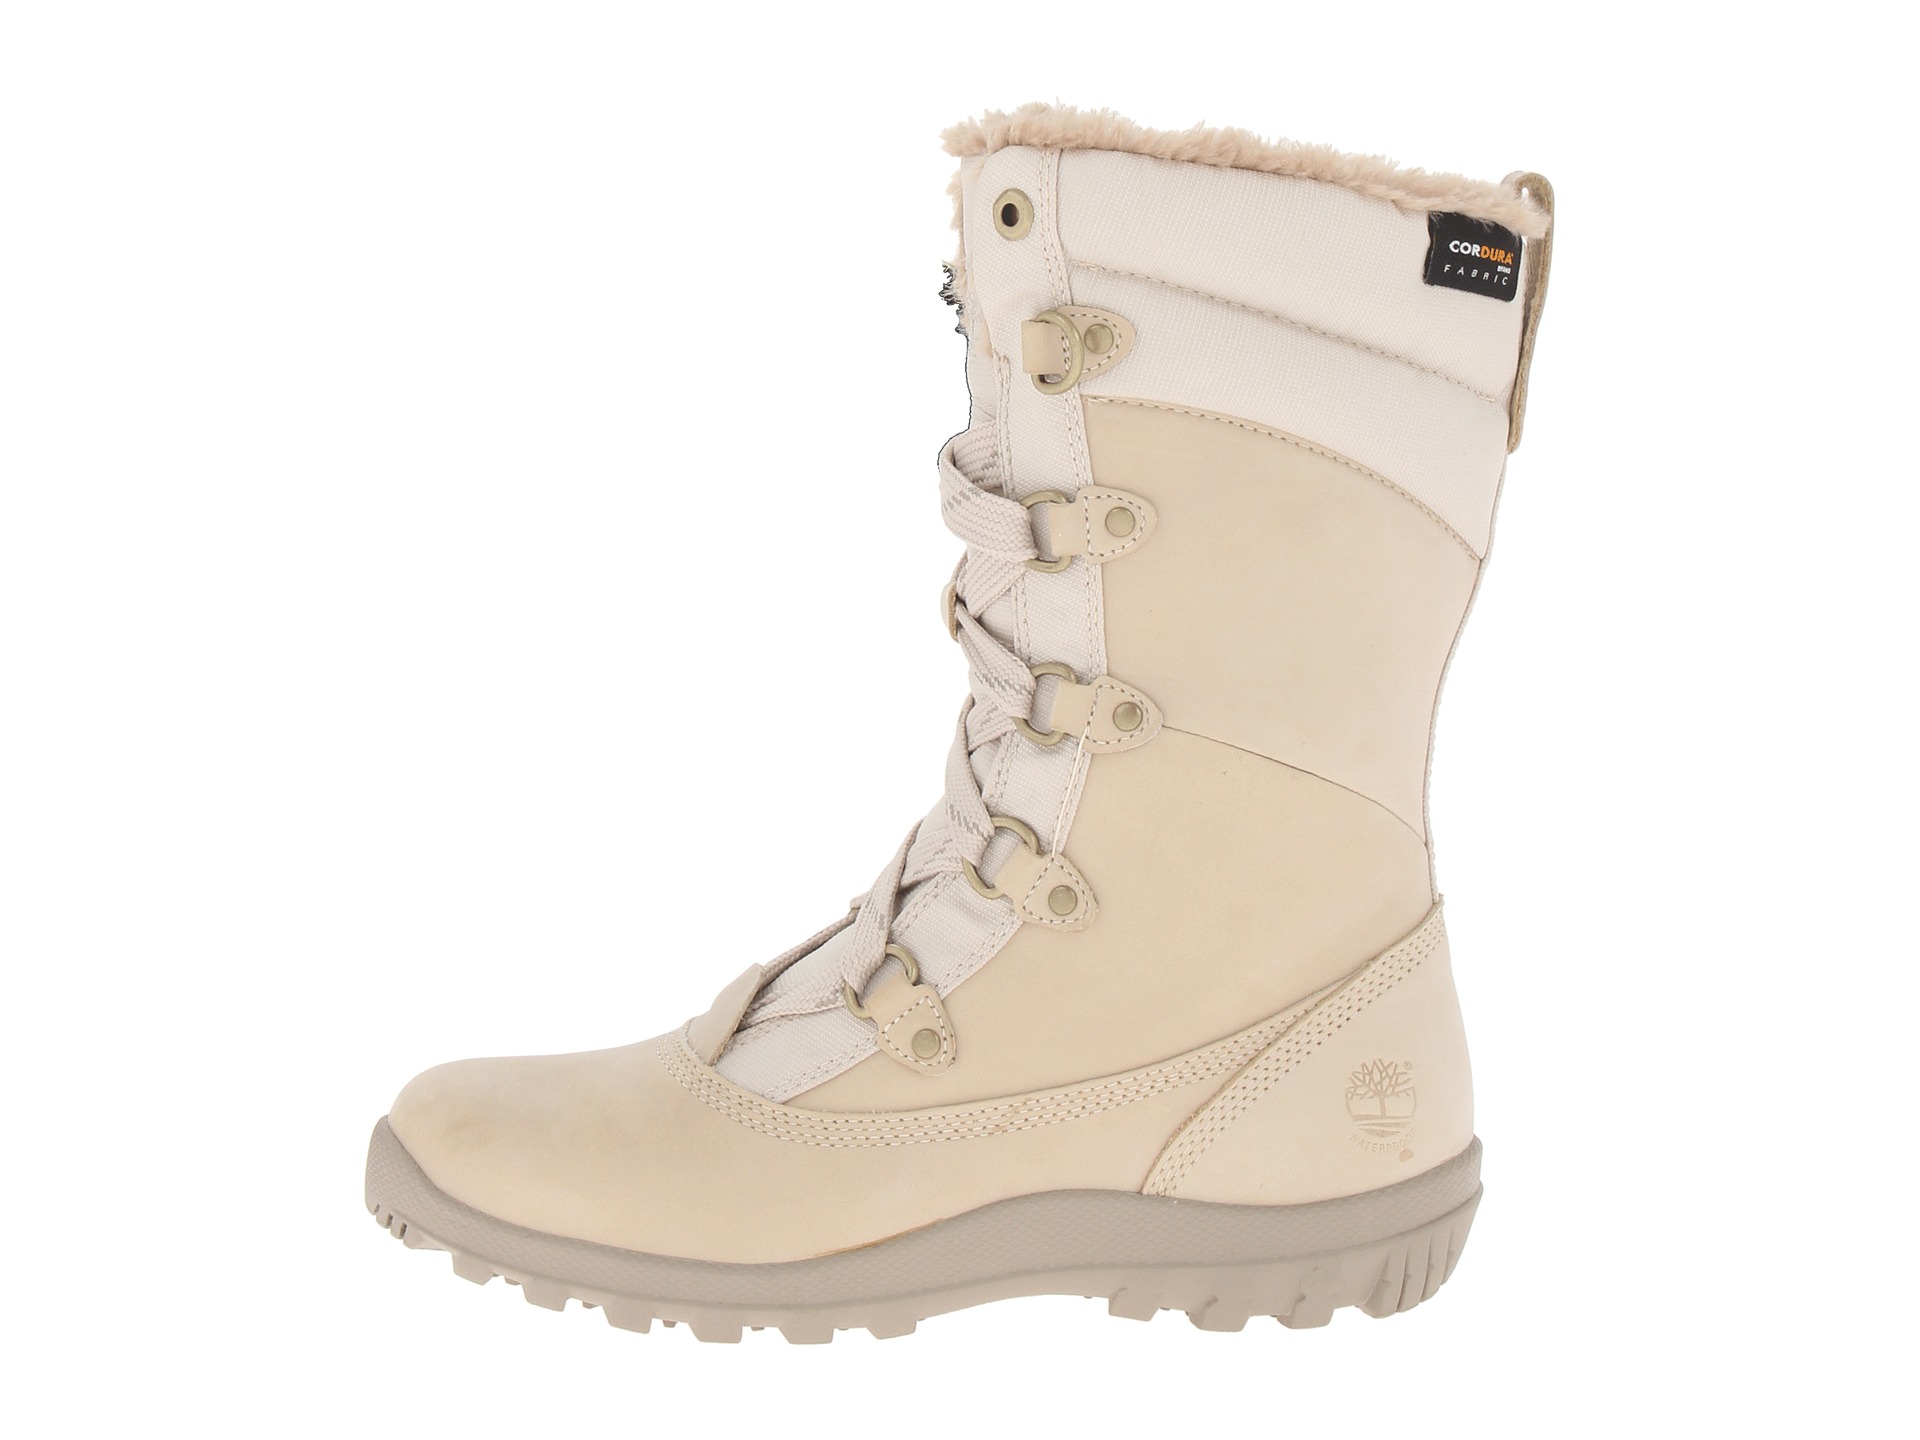 Timberland Mount Hope Mid - Zappos.com Free Shipping BOTH Ways